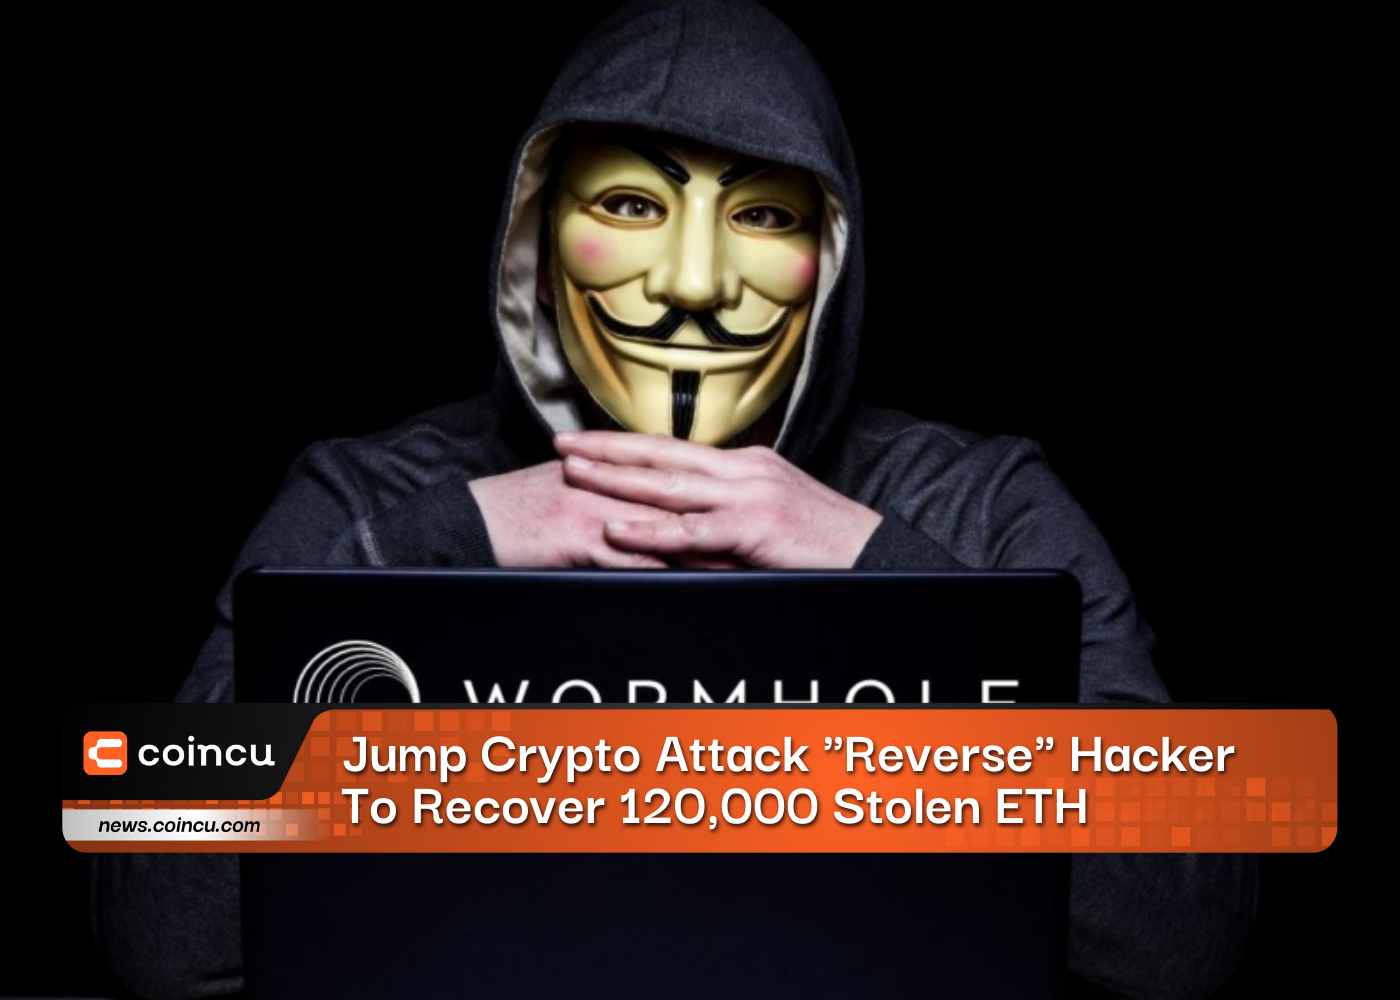 Jump Crypto Attack "Reverse" Hacker To Recover 120,000 Stolen ETH